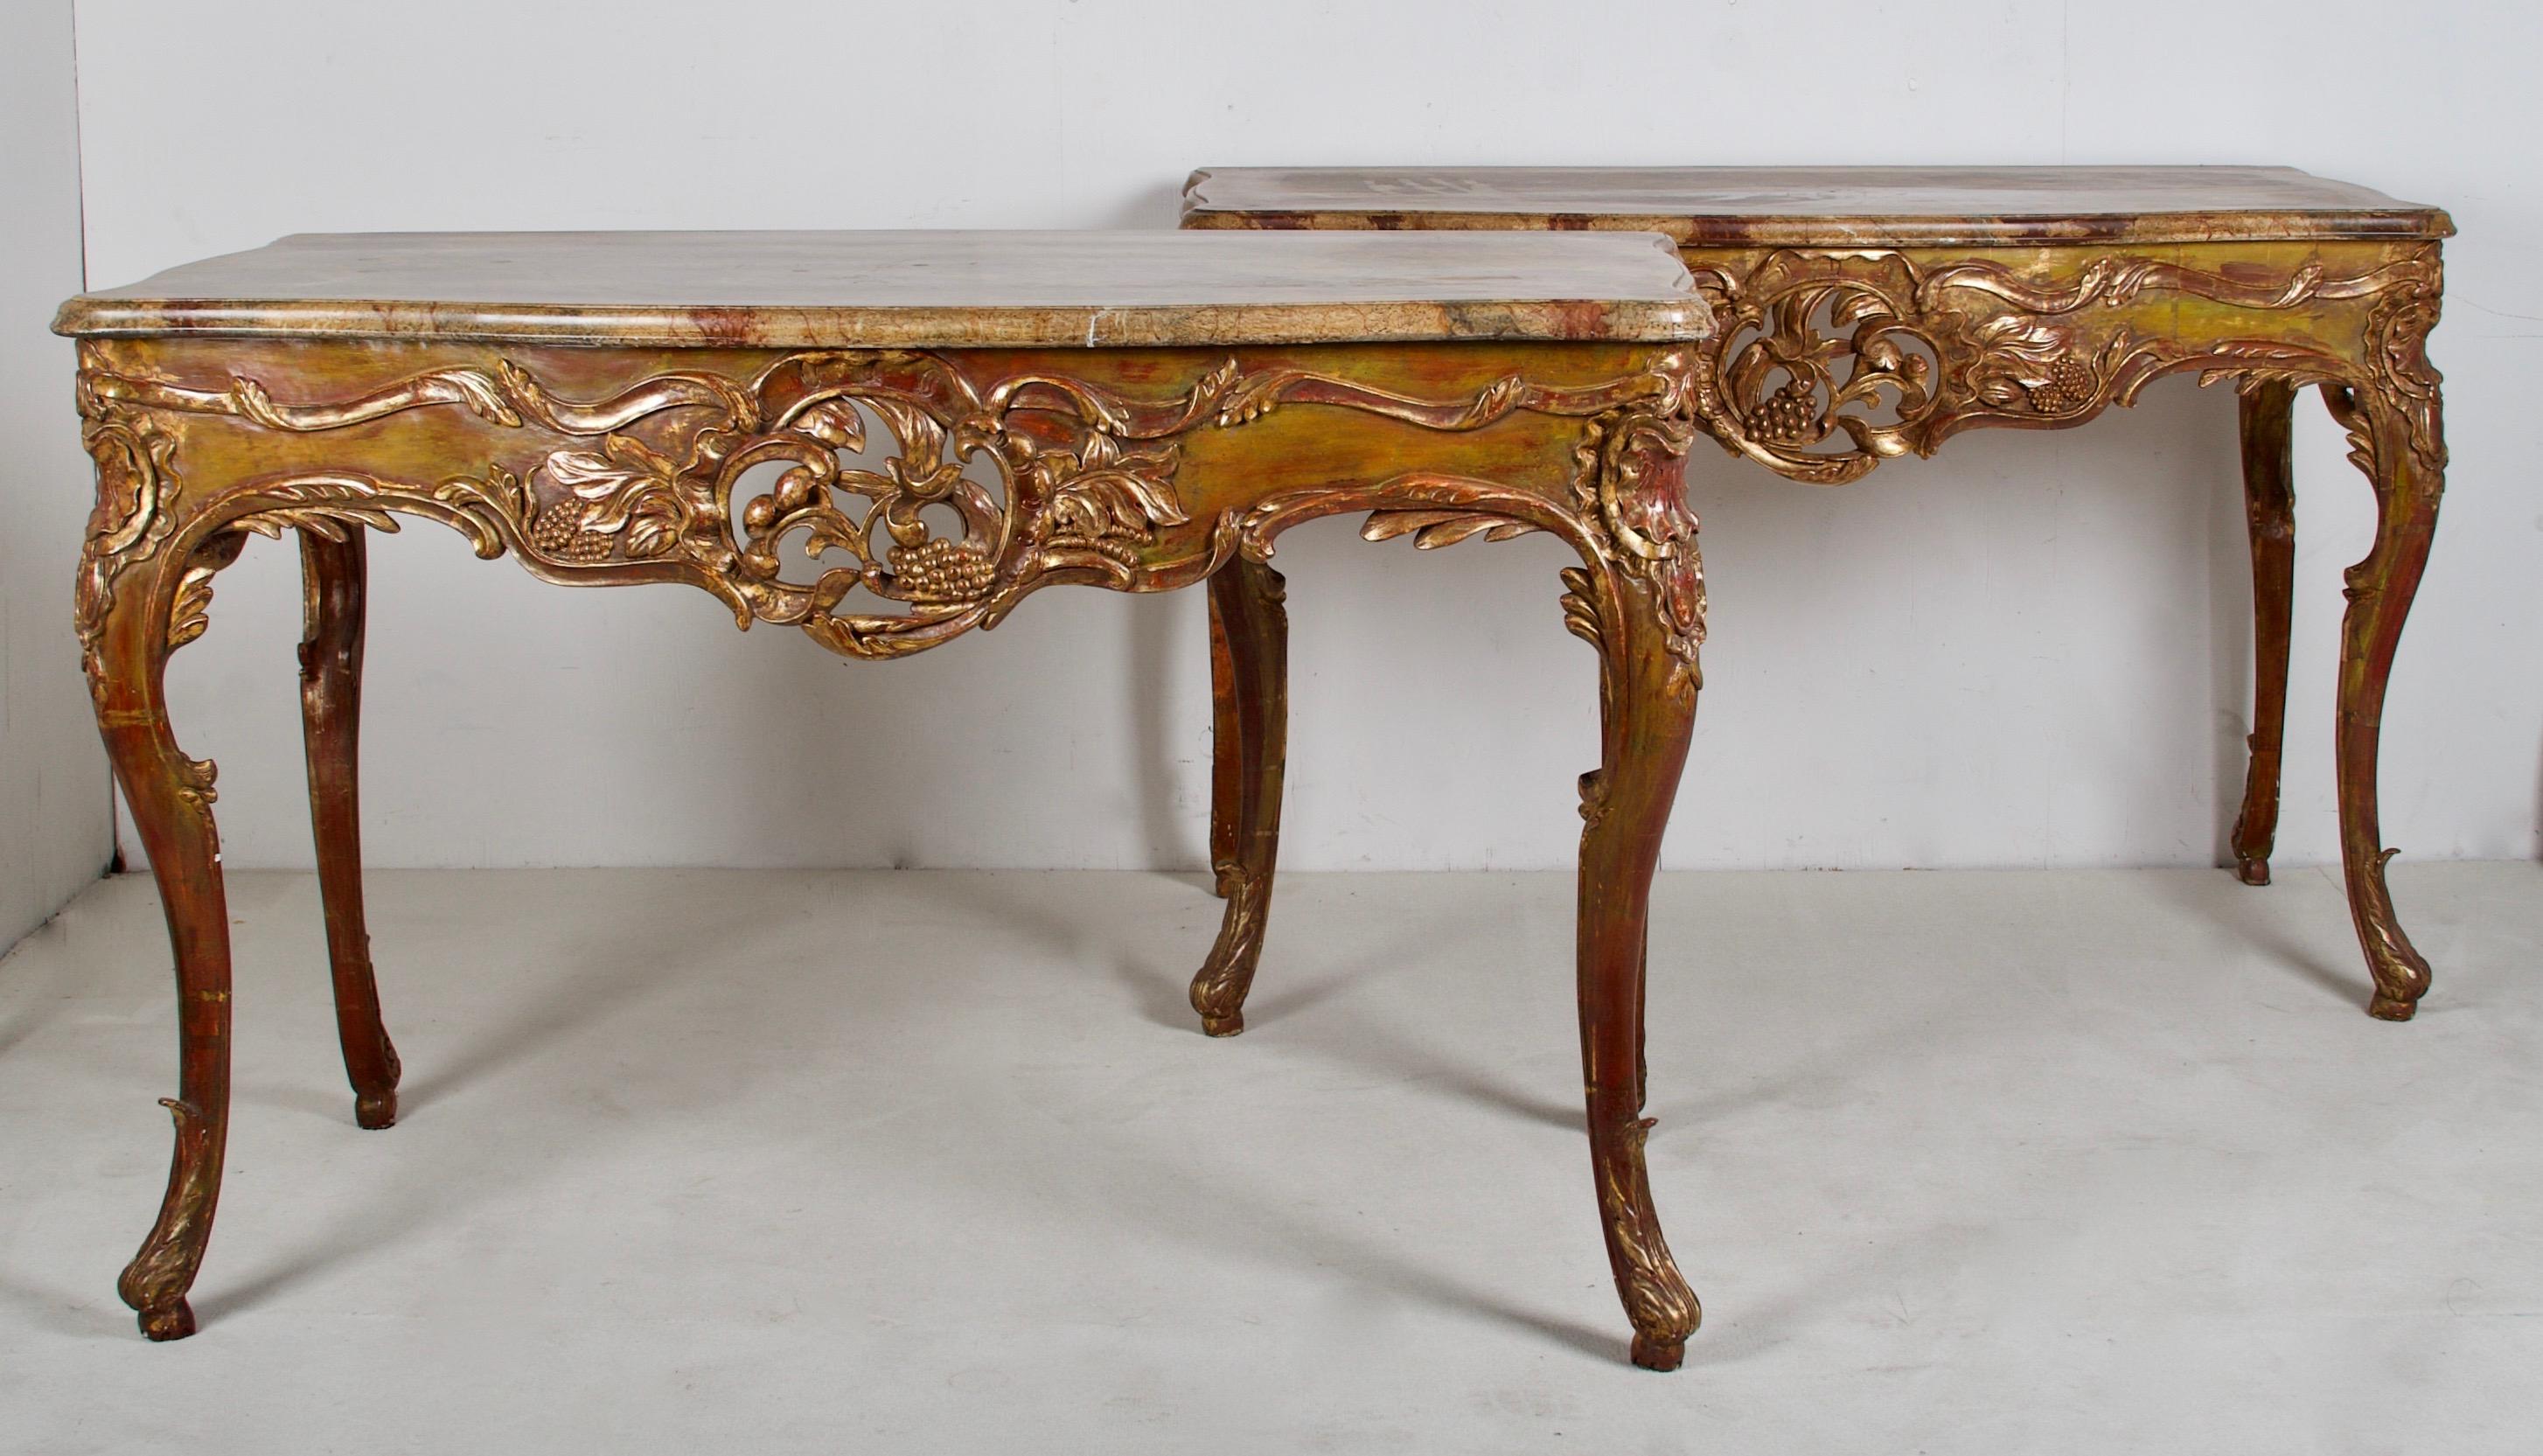 A playfull and flamboyant pair of painted and gilded, hand carved console tables, finished
with a nicely done faux marble top.